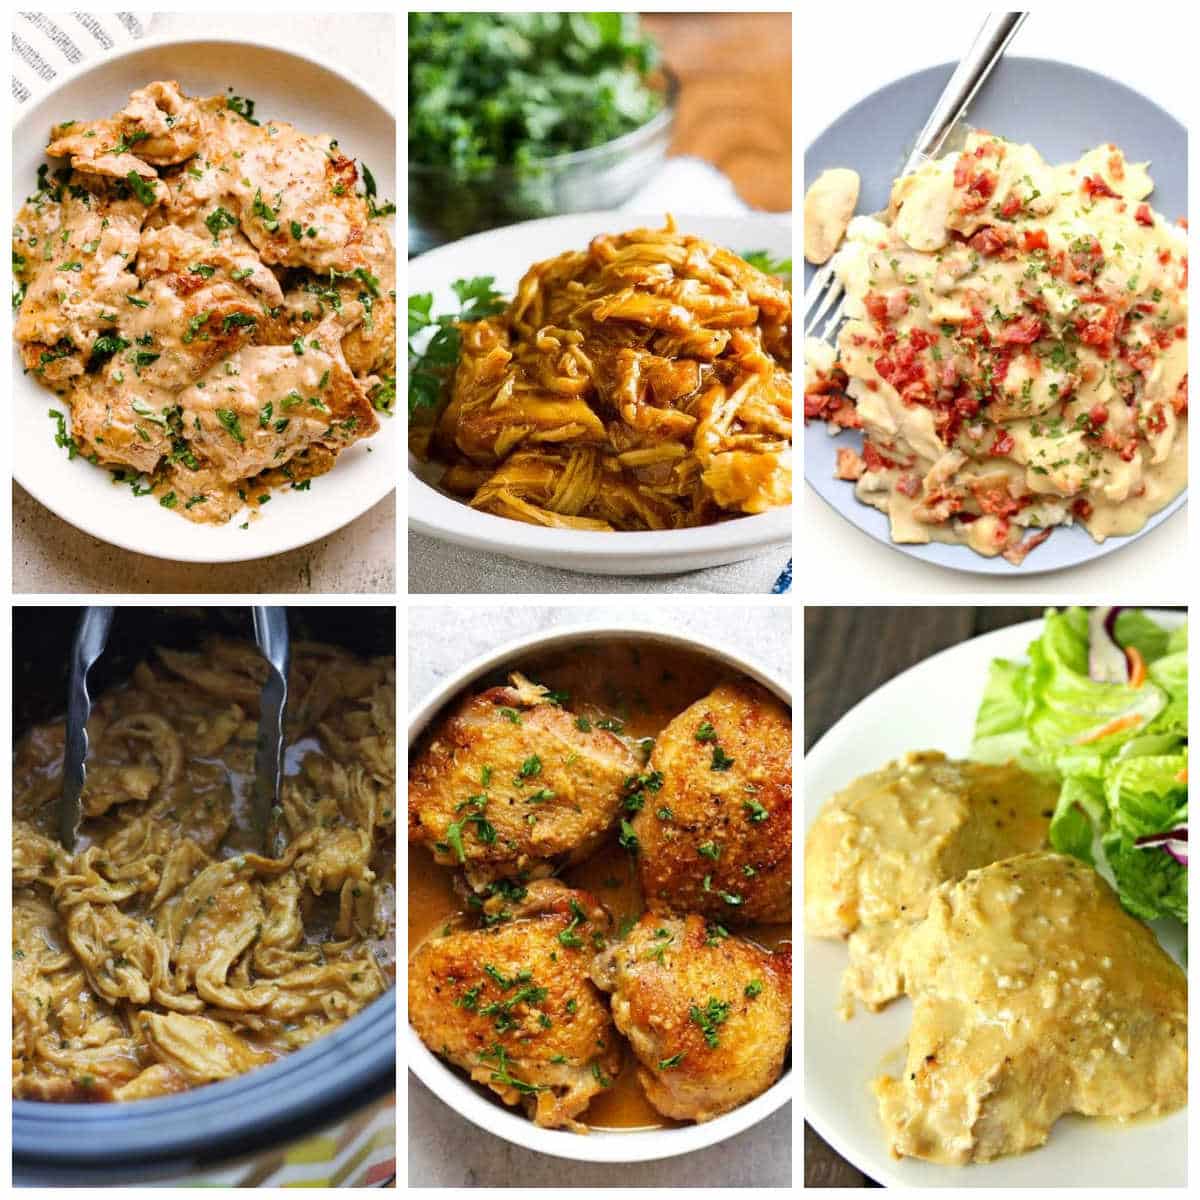 Honey Mustard Chicken Recipes (Slow Cooker or Instant Pot) collage of featured recipes